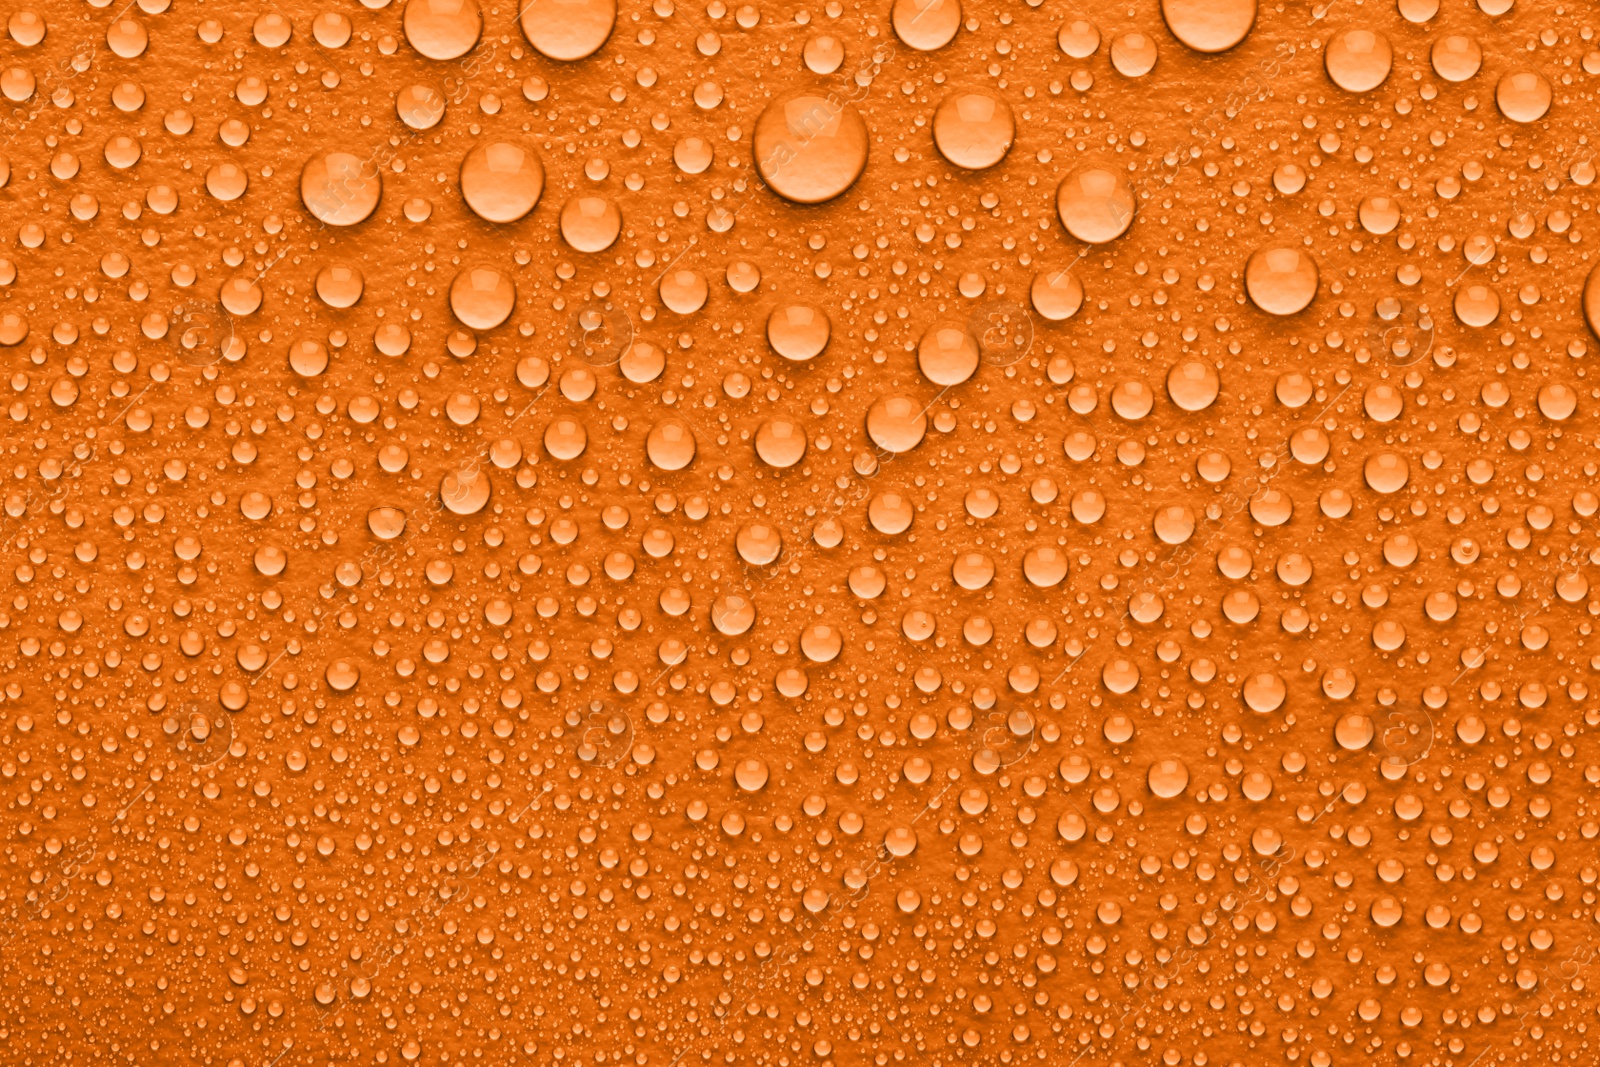 Image of Water drops on orange background, top view